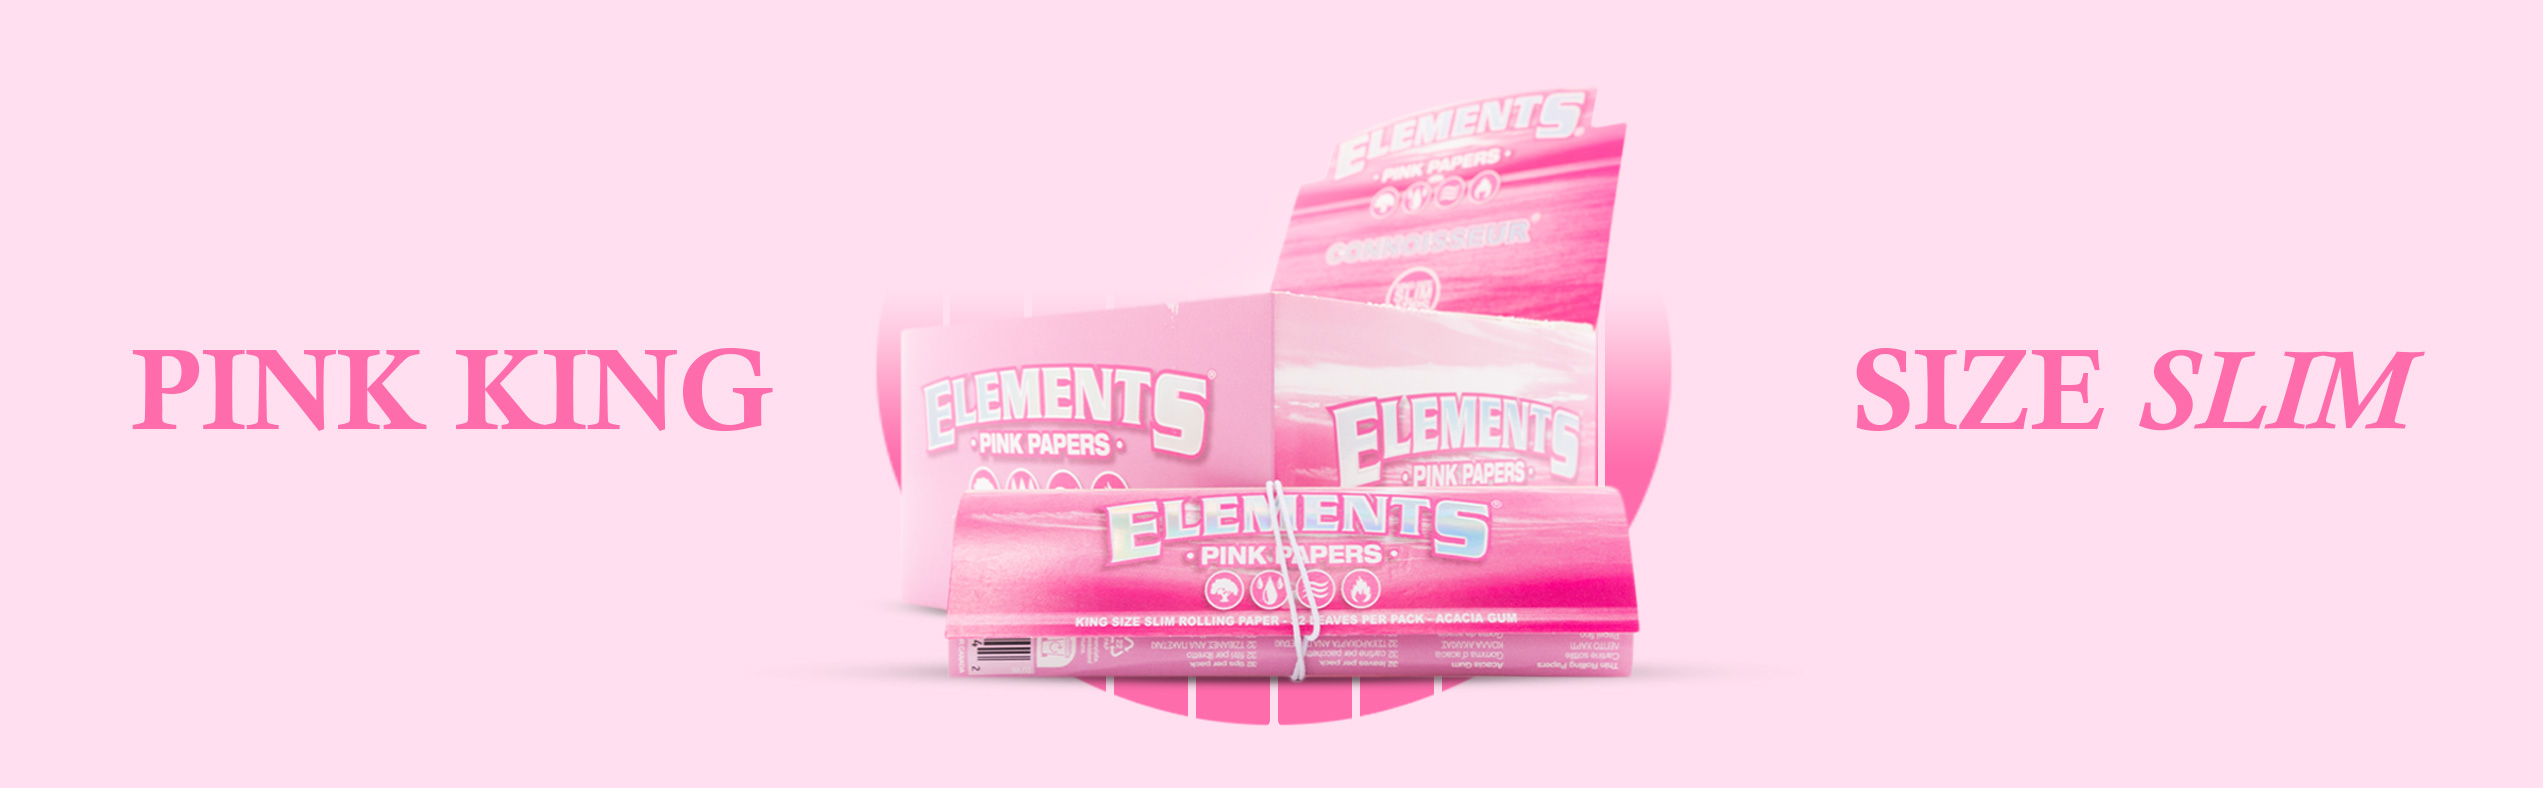 Elements Pink Connoisseur King-Size Slim Rolling Papers